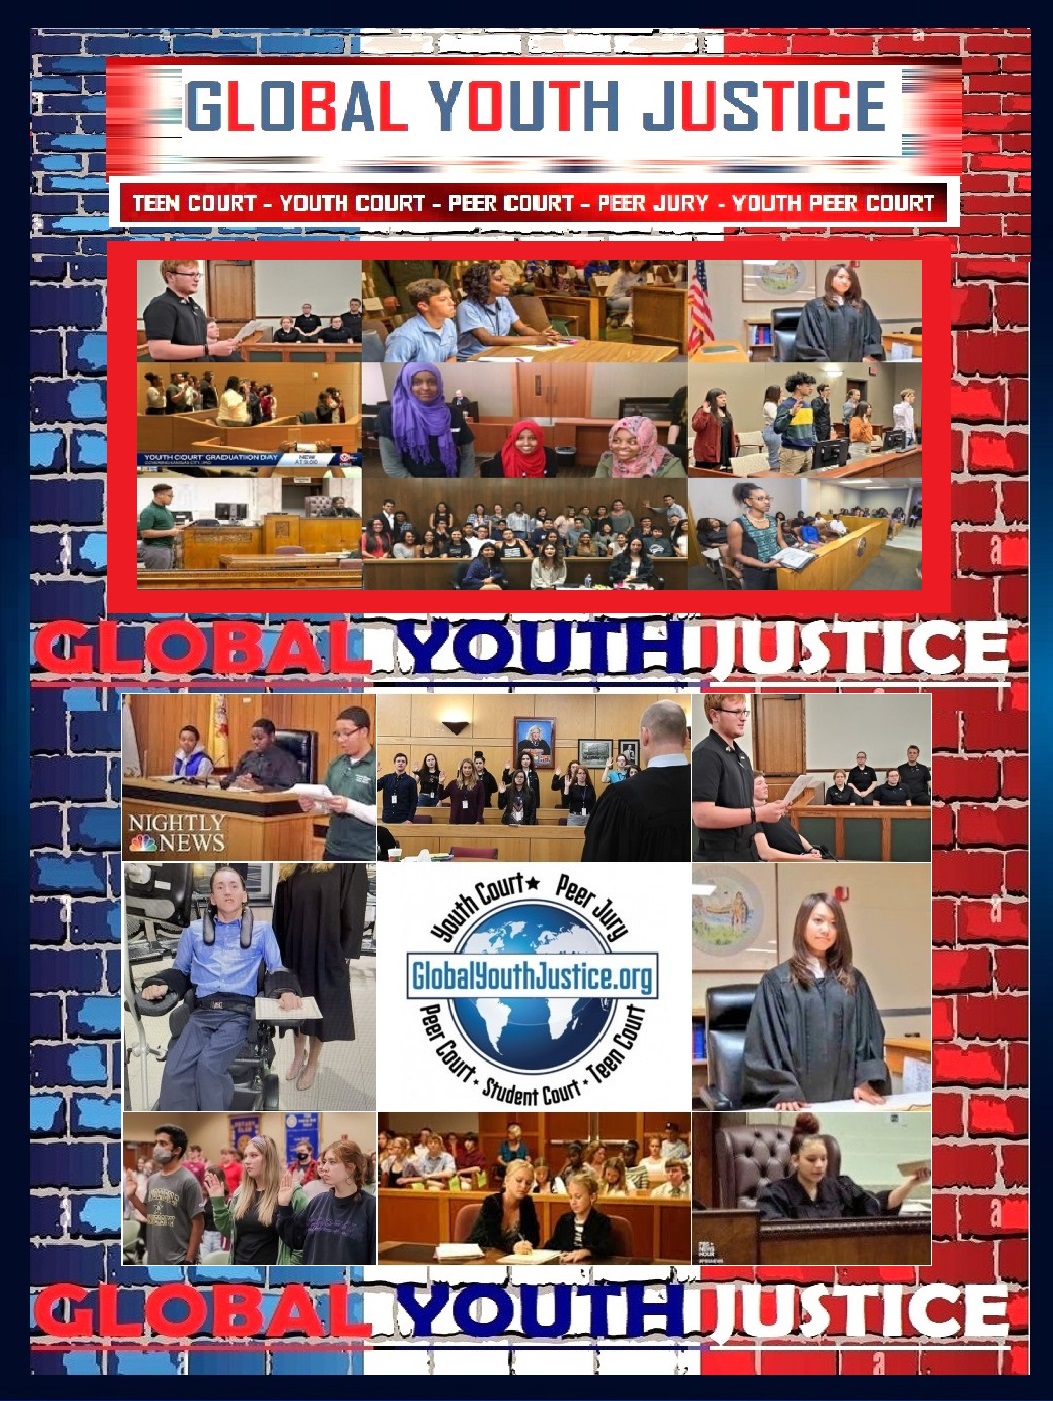 Global Youth Justice, Inc. Website on Teen Court, Youth Court, Peer Court and Peer Jury Diversion Programs.